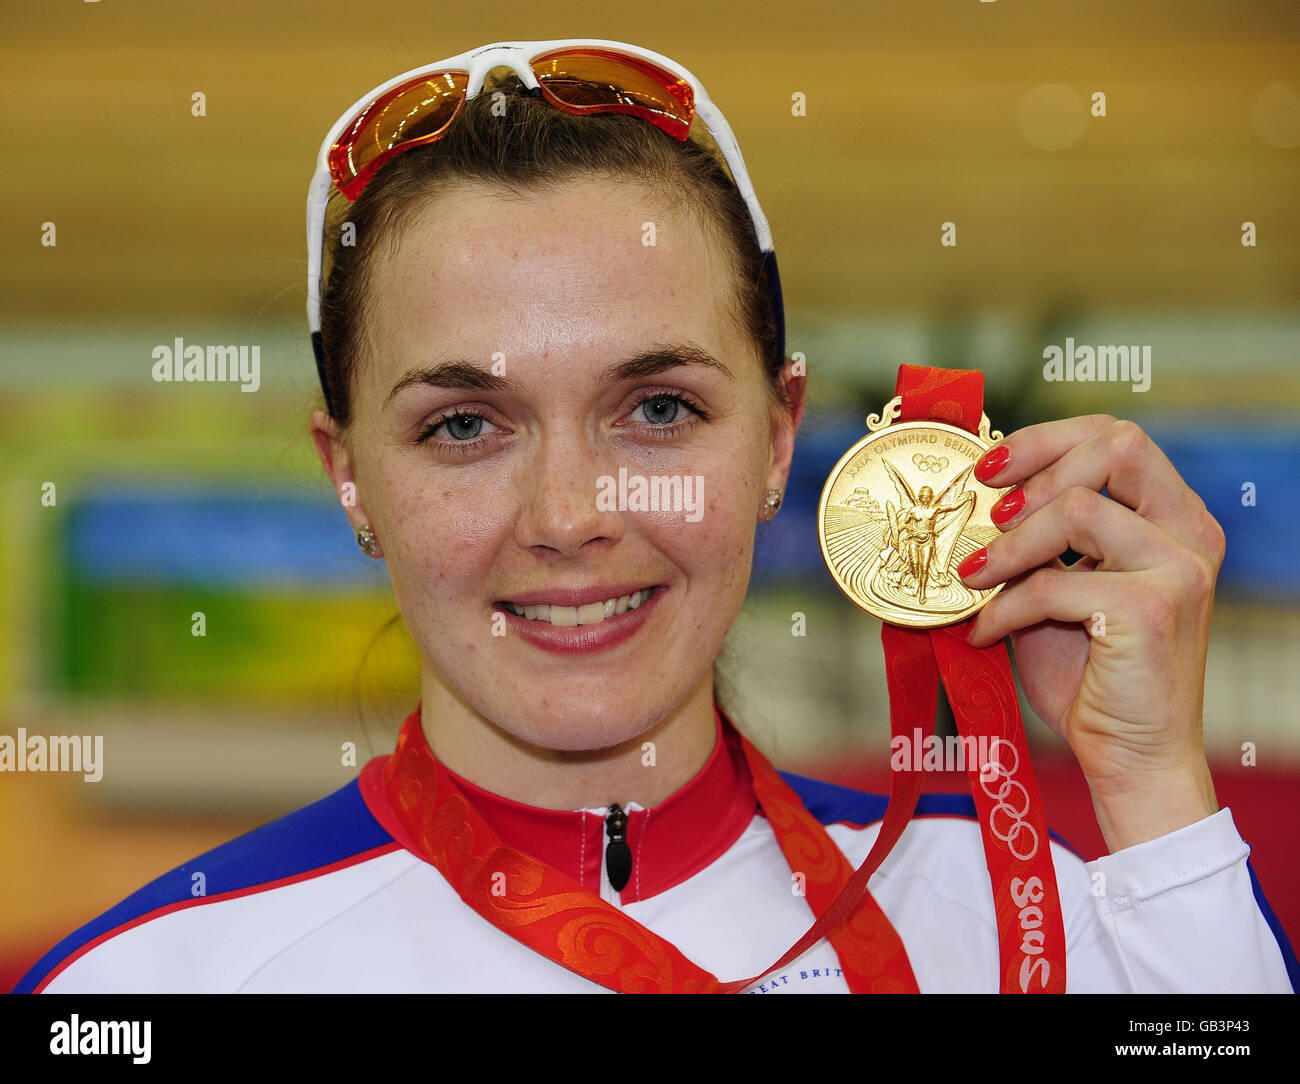 Great Britain's Victoria Pendleton with the Gold Medal from the Women's Sprint Finall at the Laoshan Velodrome at the 2008 Beijing Olympic Games in China. Stock Photo